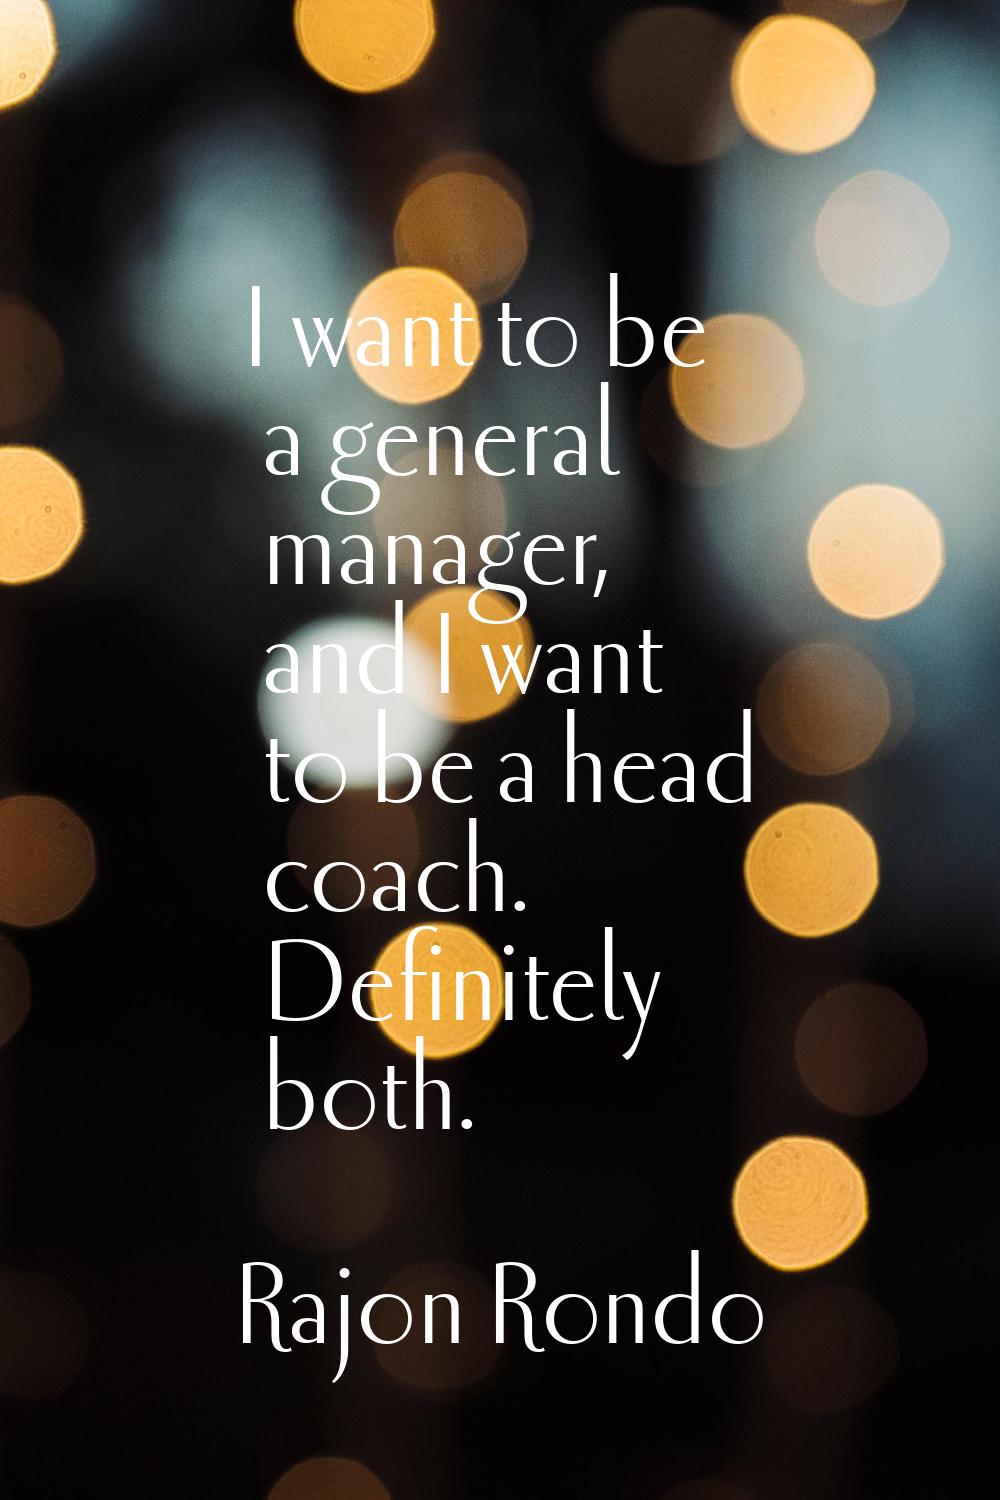 I want to be a general manager, and I want to be a head coach. Definitely both.